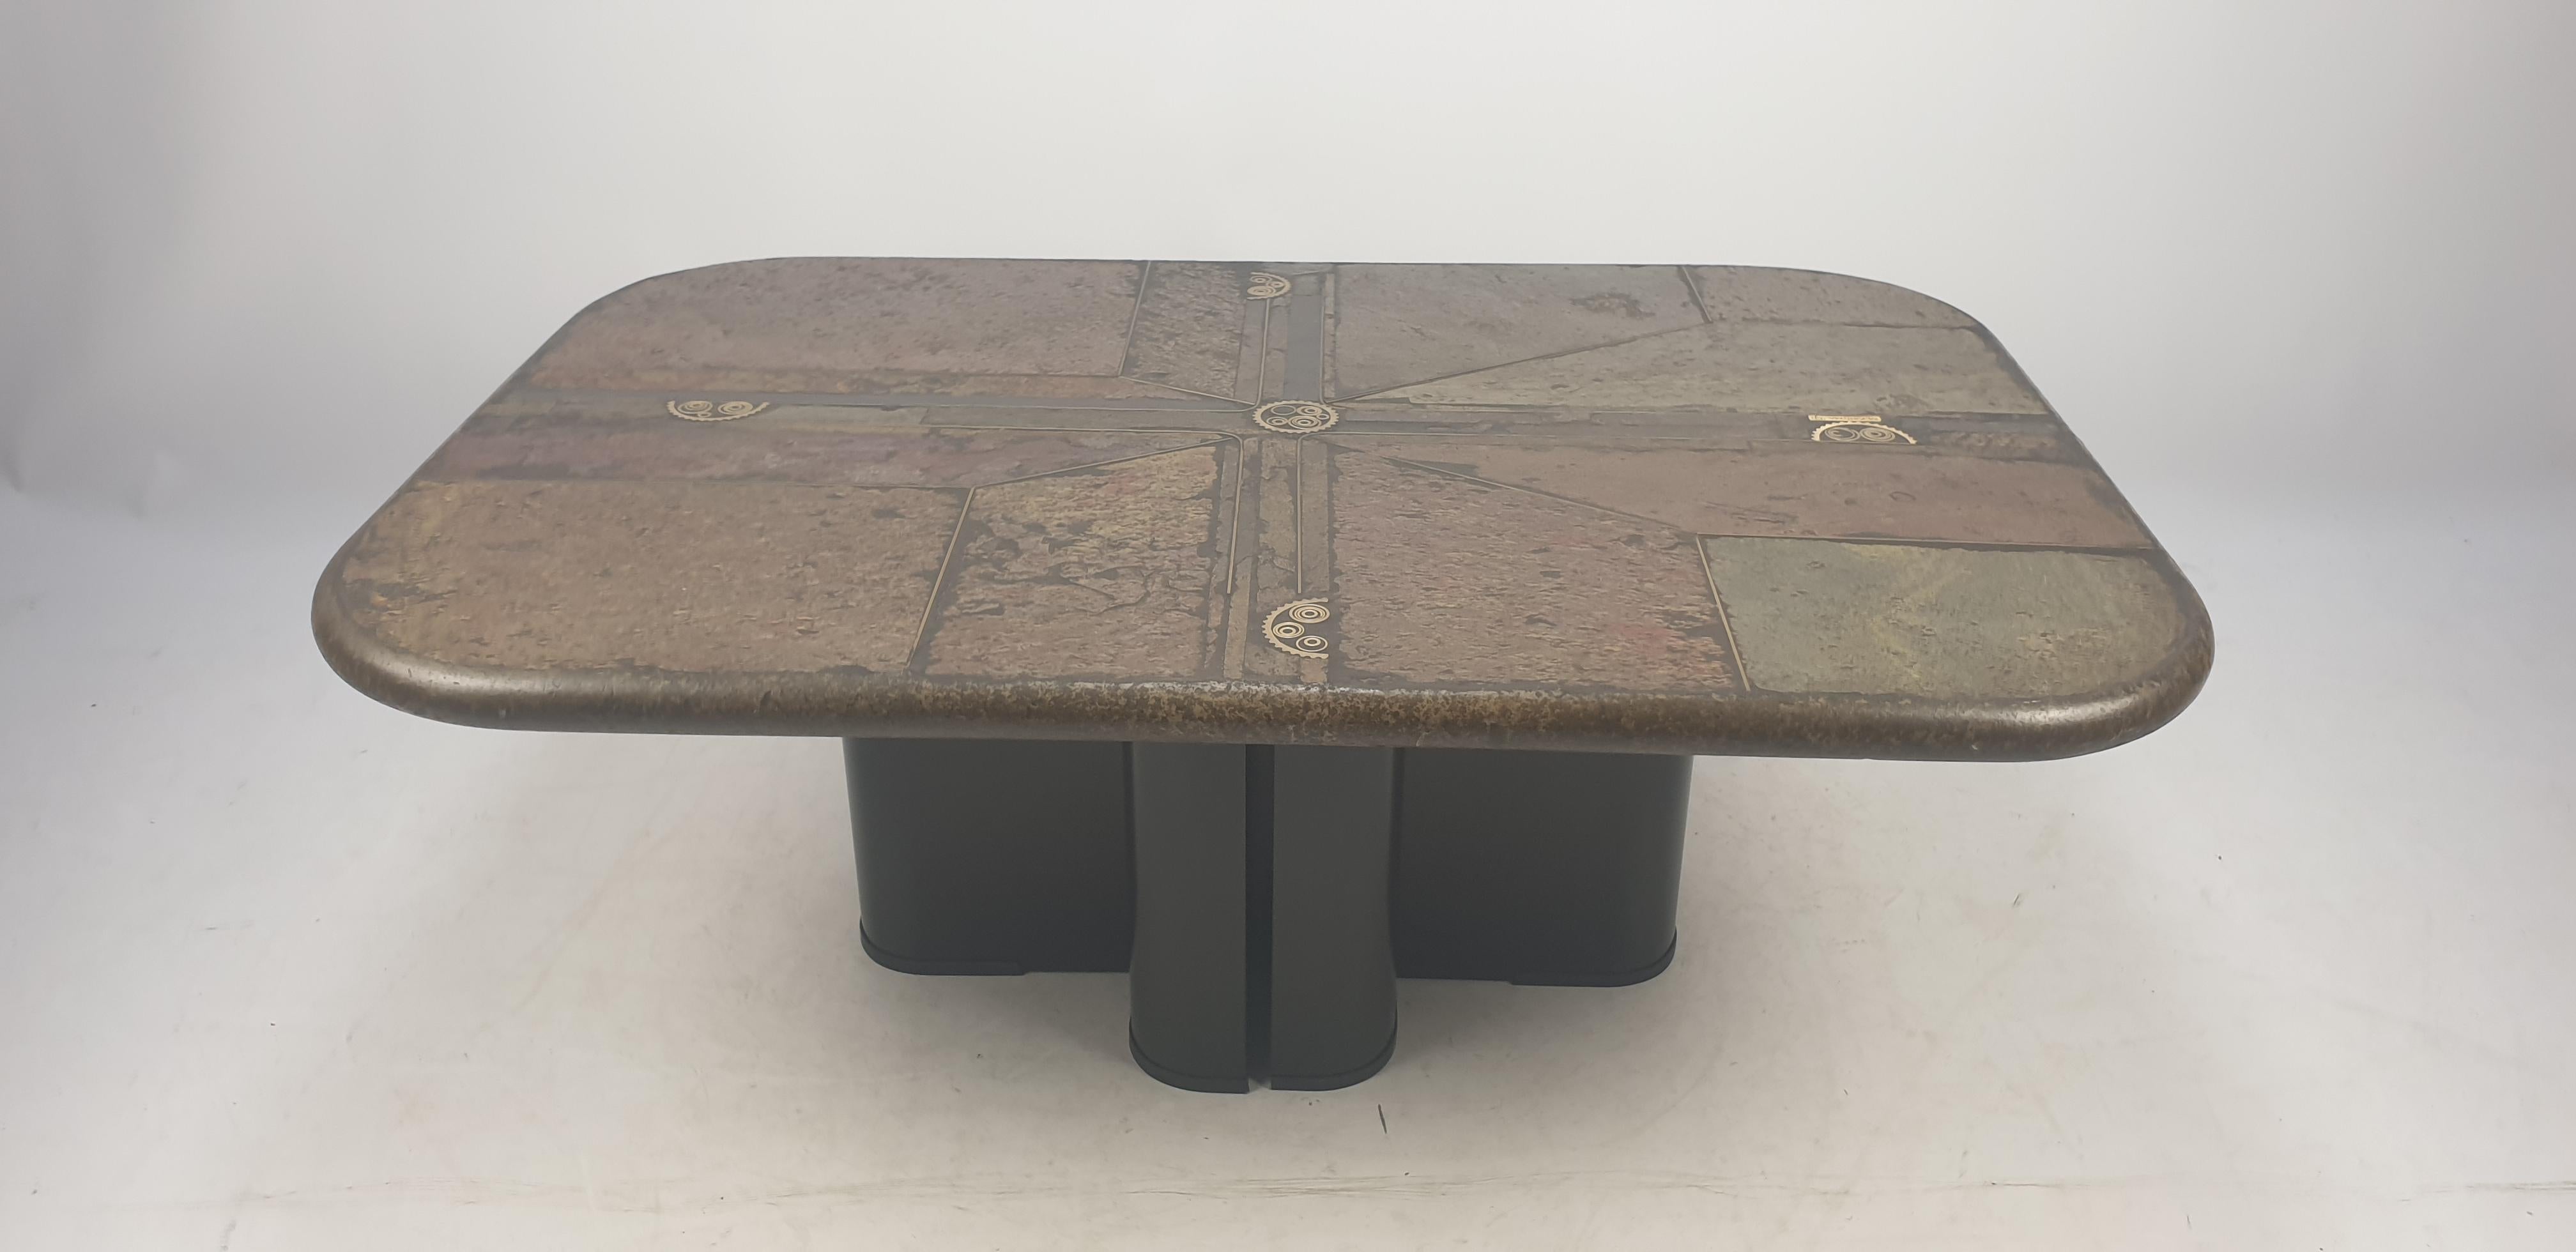 Metal Square Coffee Table by Marcus Kingma, 1991